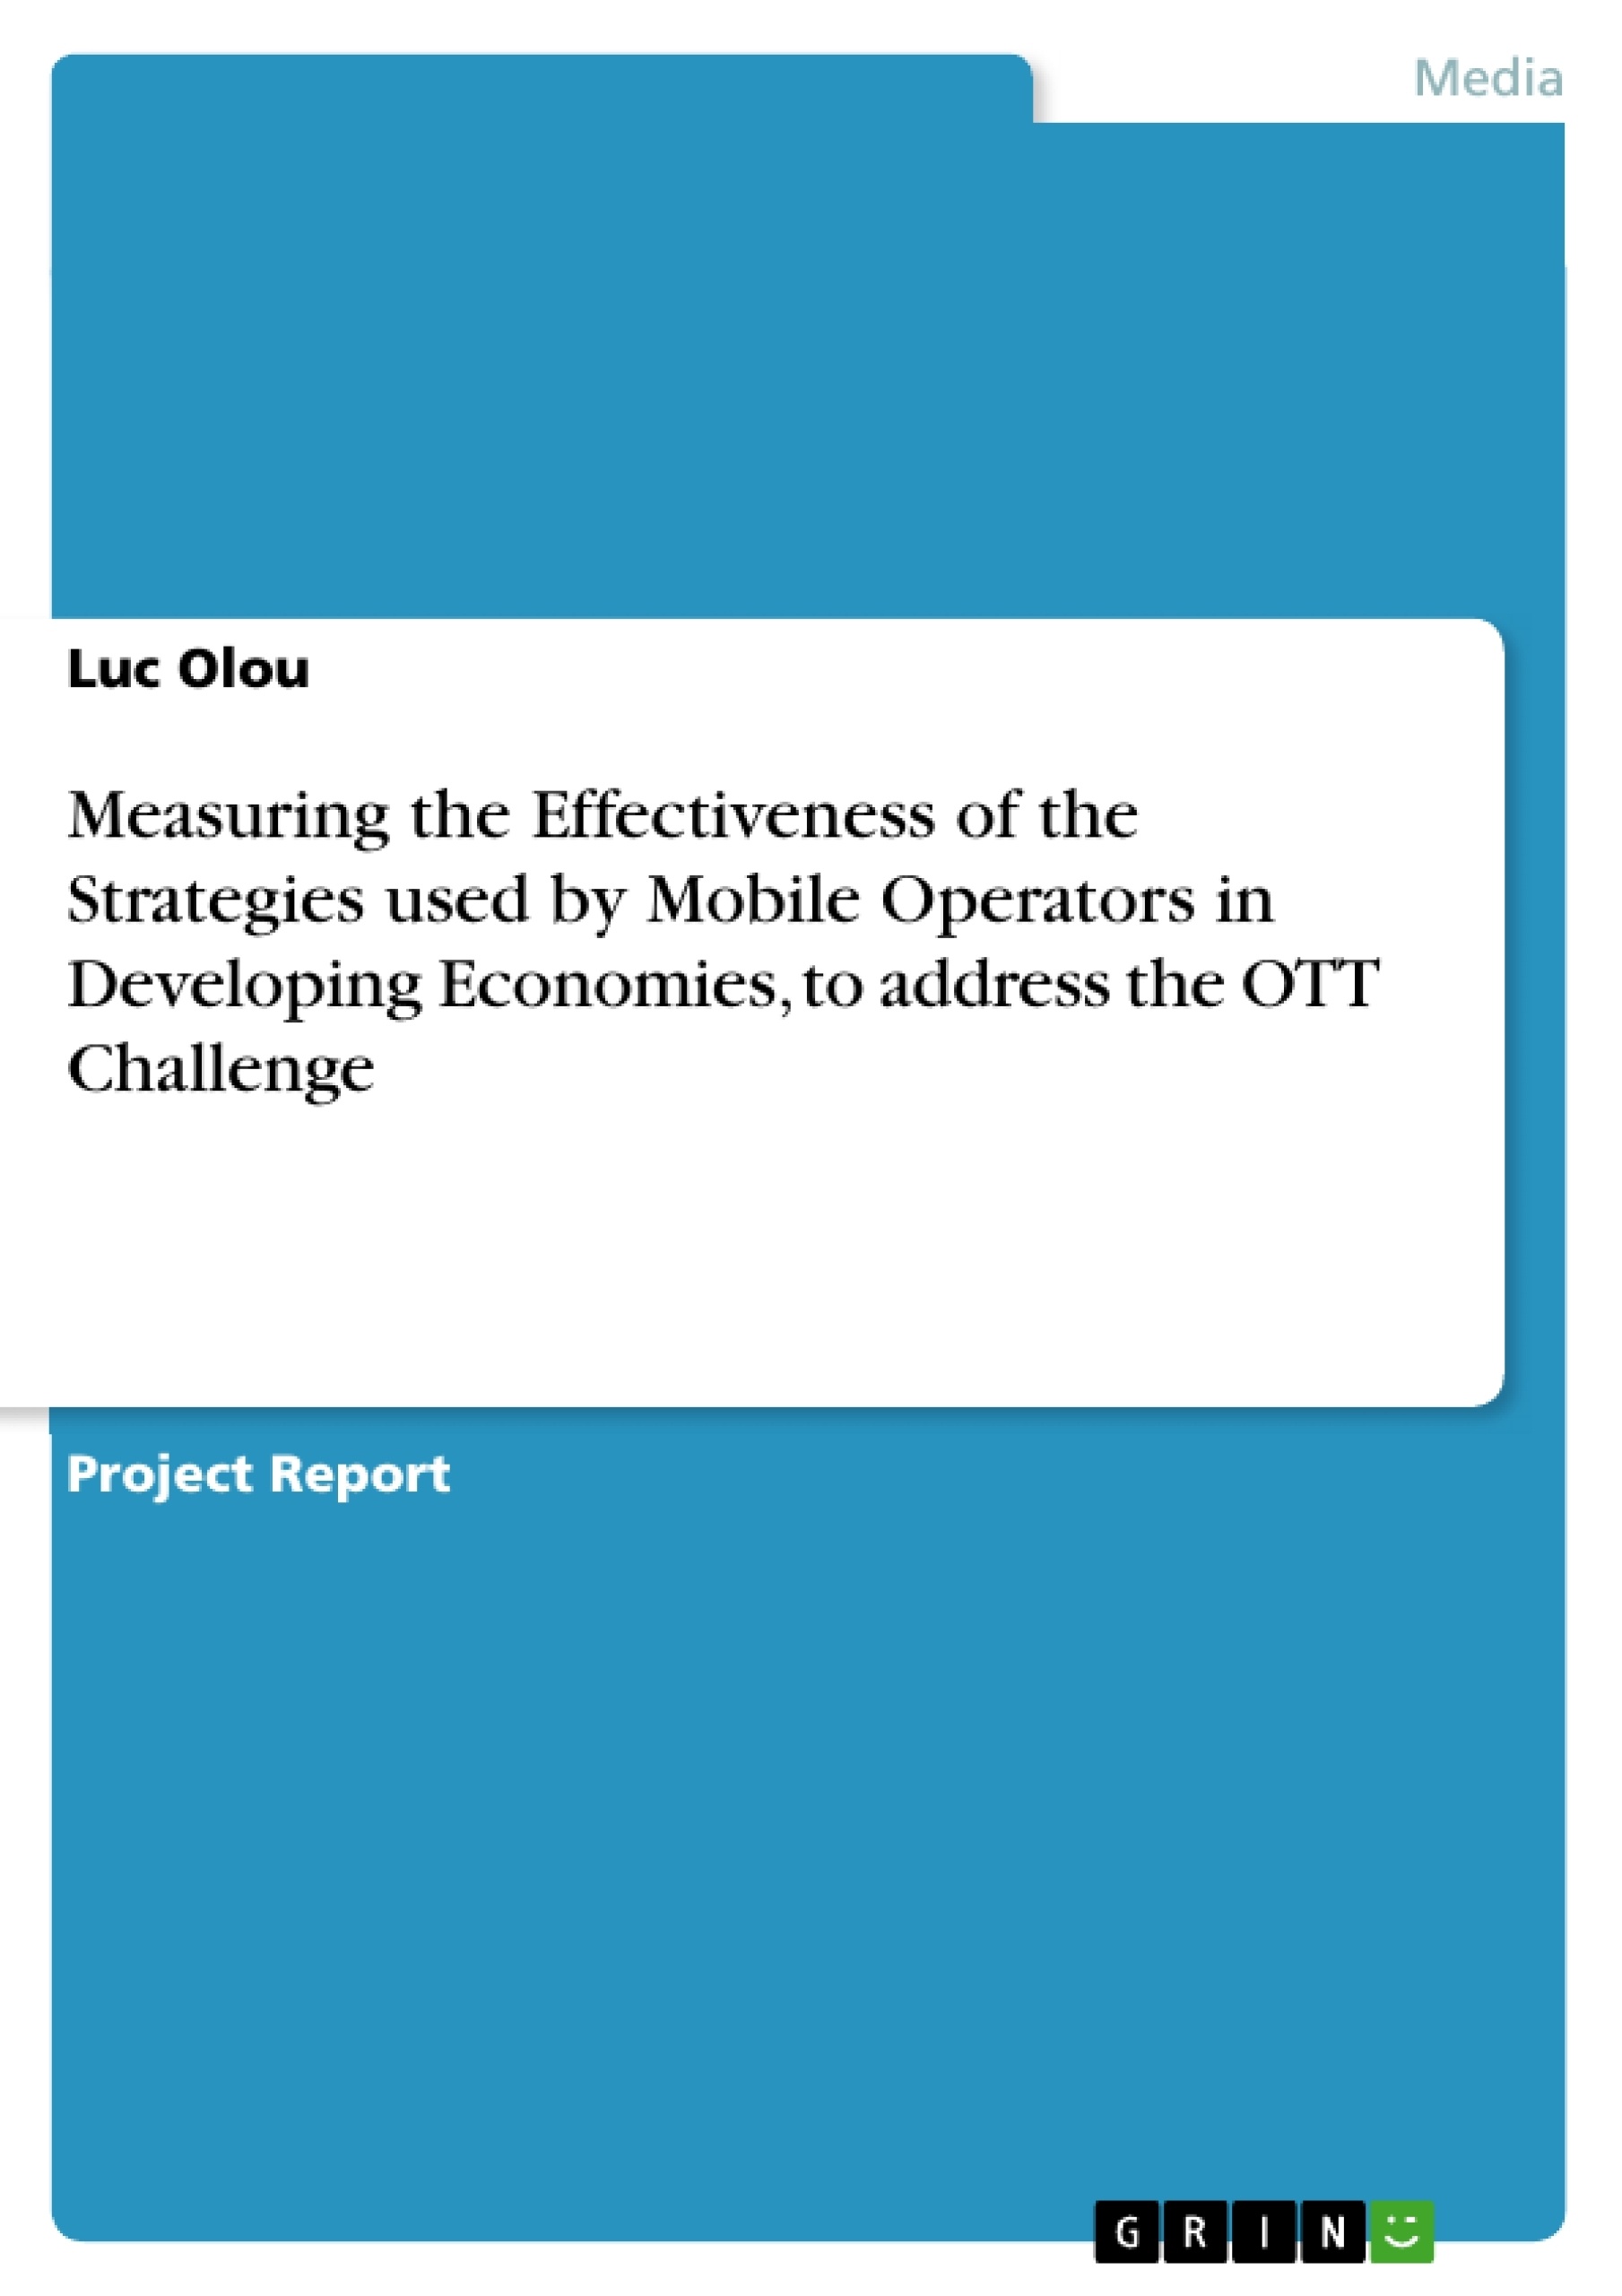 Title: Measuring the Effectiveness of the Strategies used by Mobile Operators in Developing Economies, to address the OTT Challenge